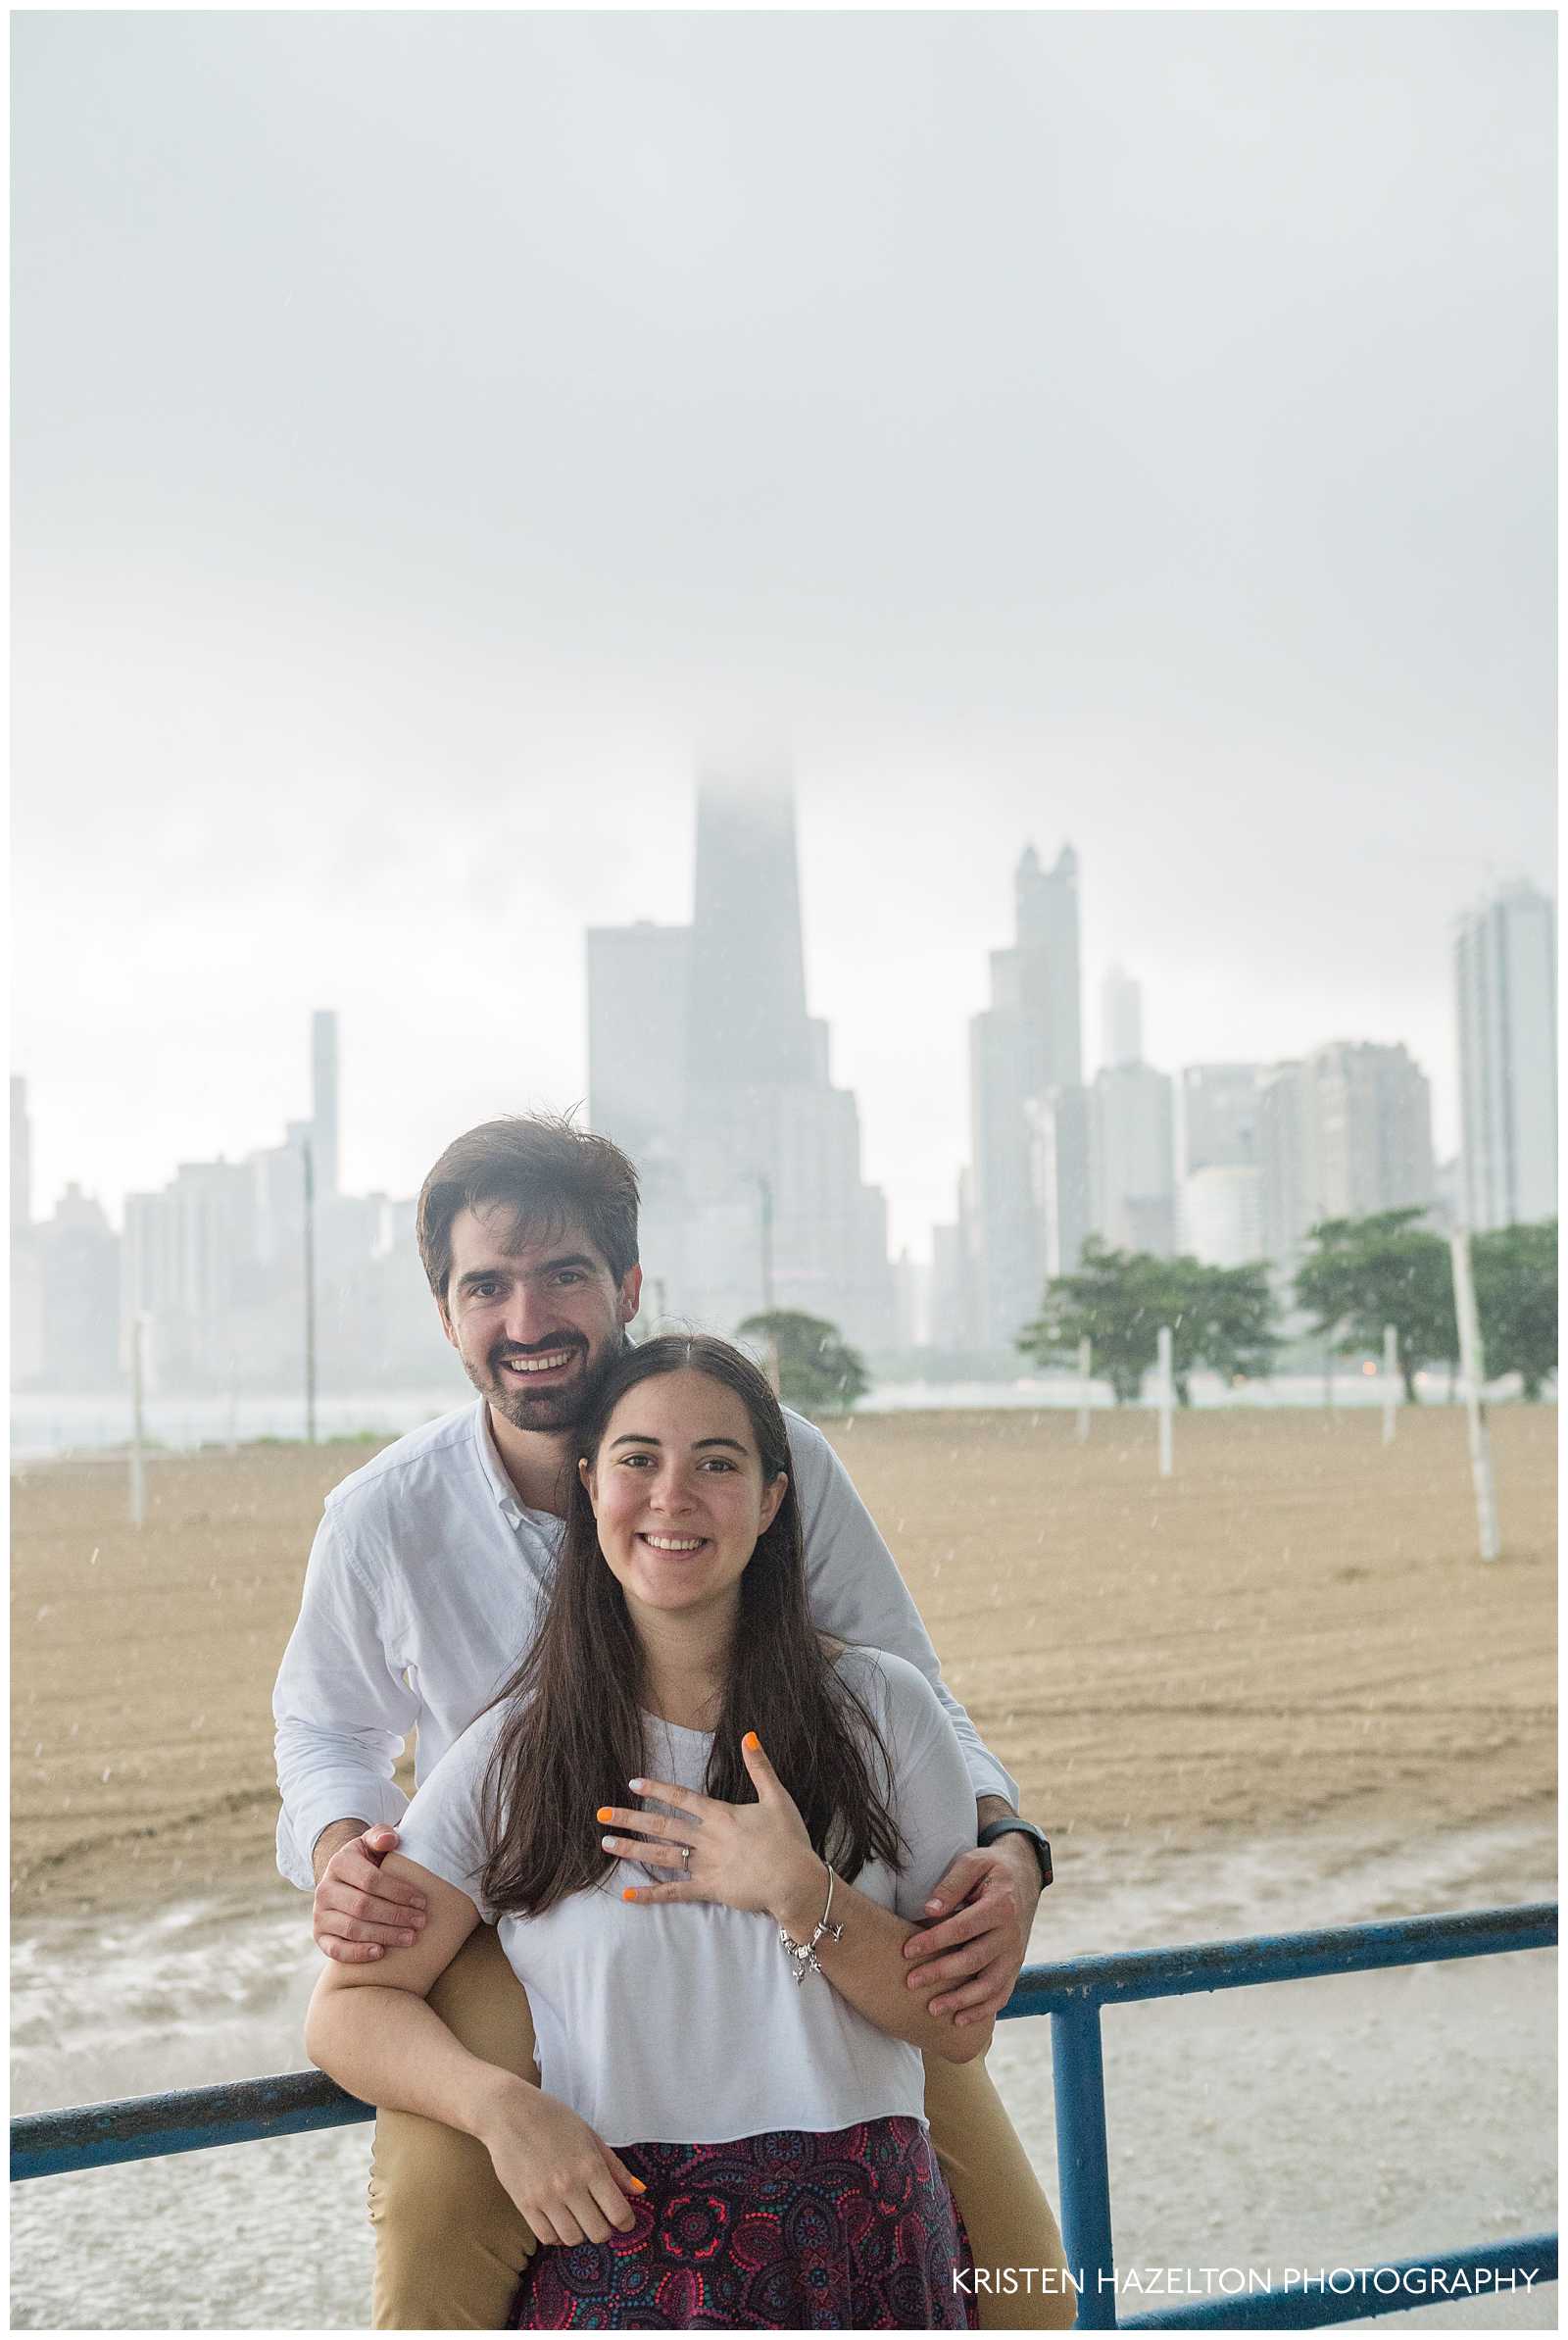 Newly engaged couple at North Avenue Beach during severe rainstorm